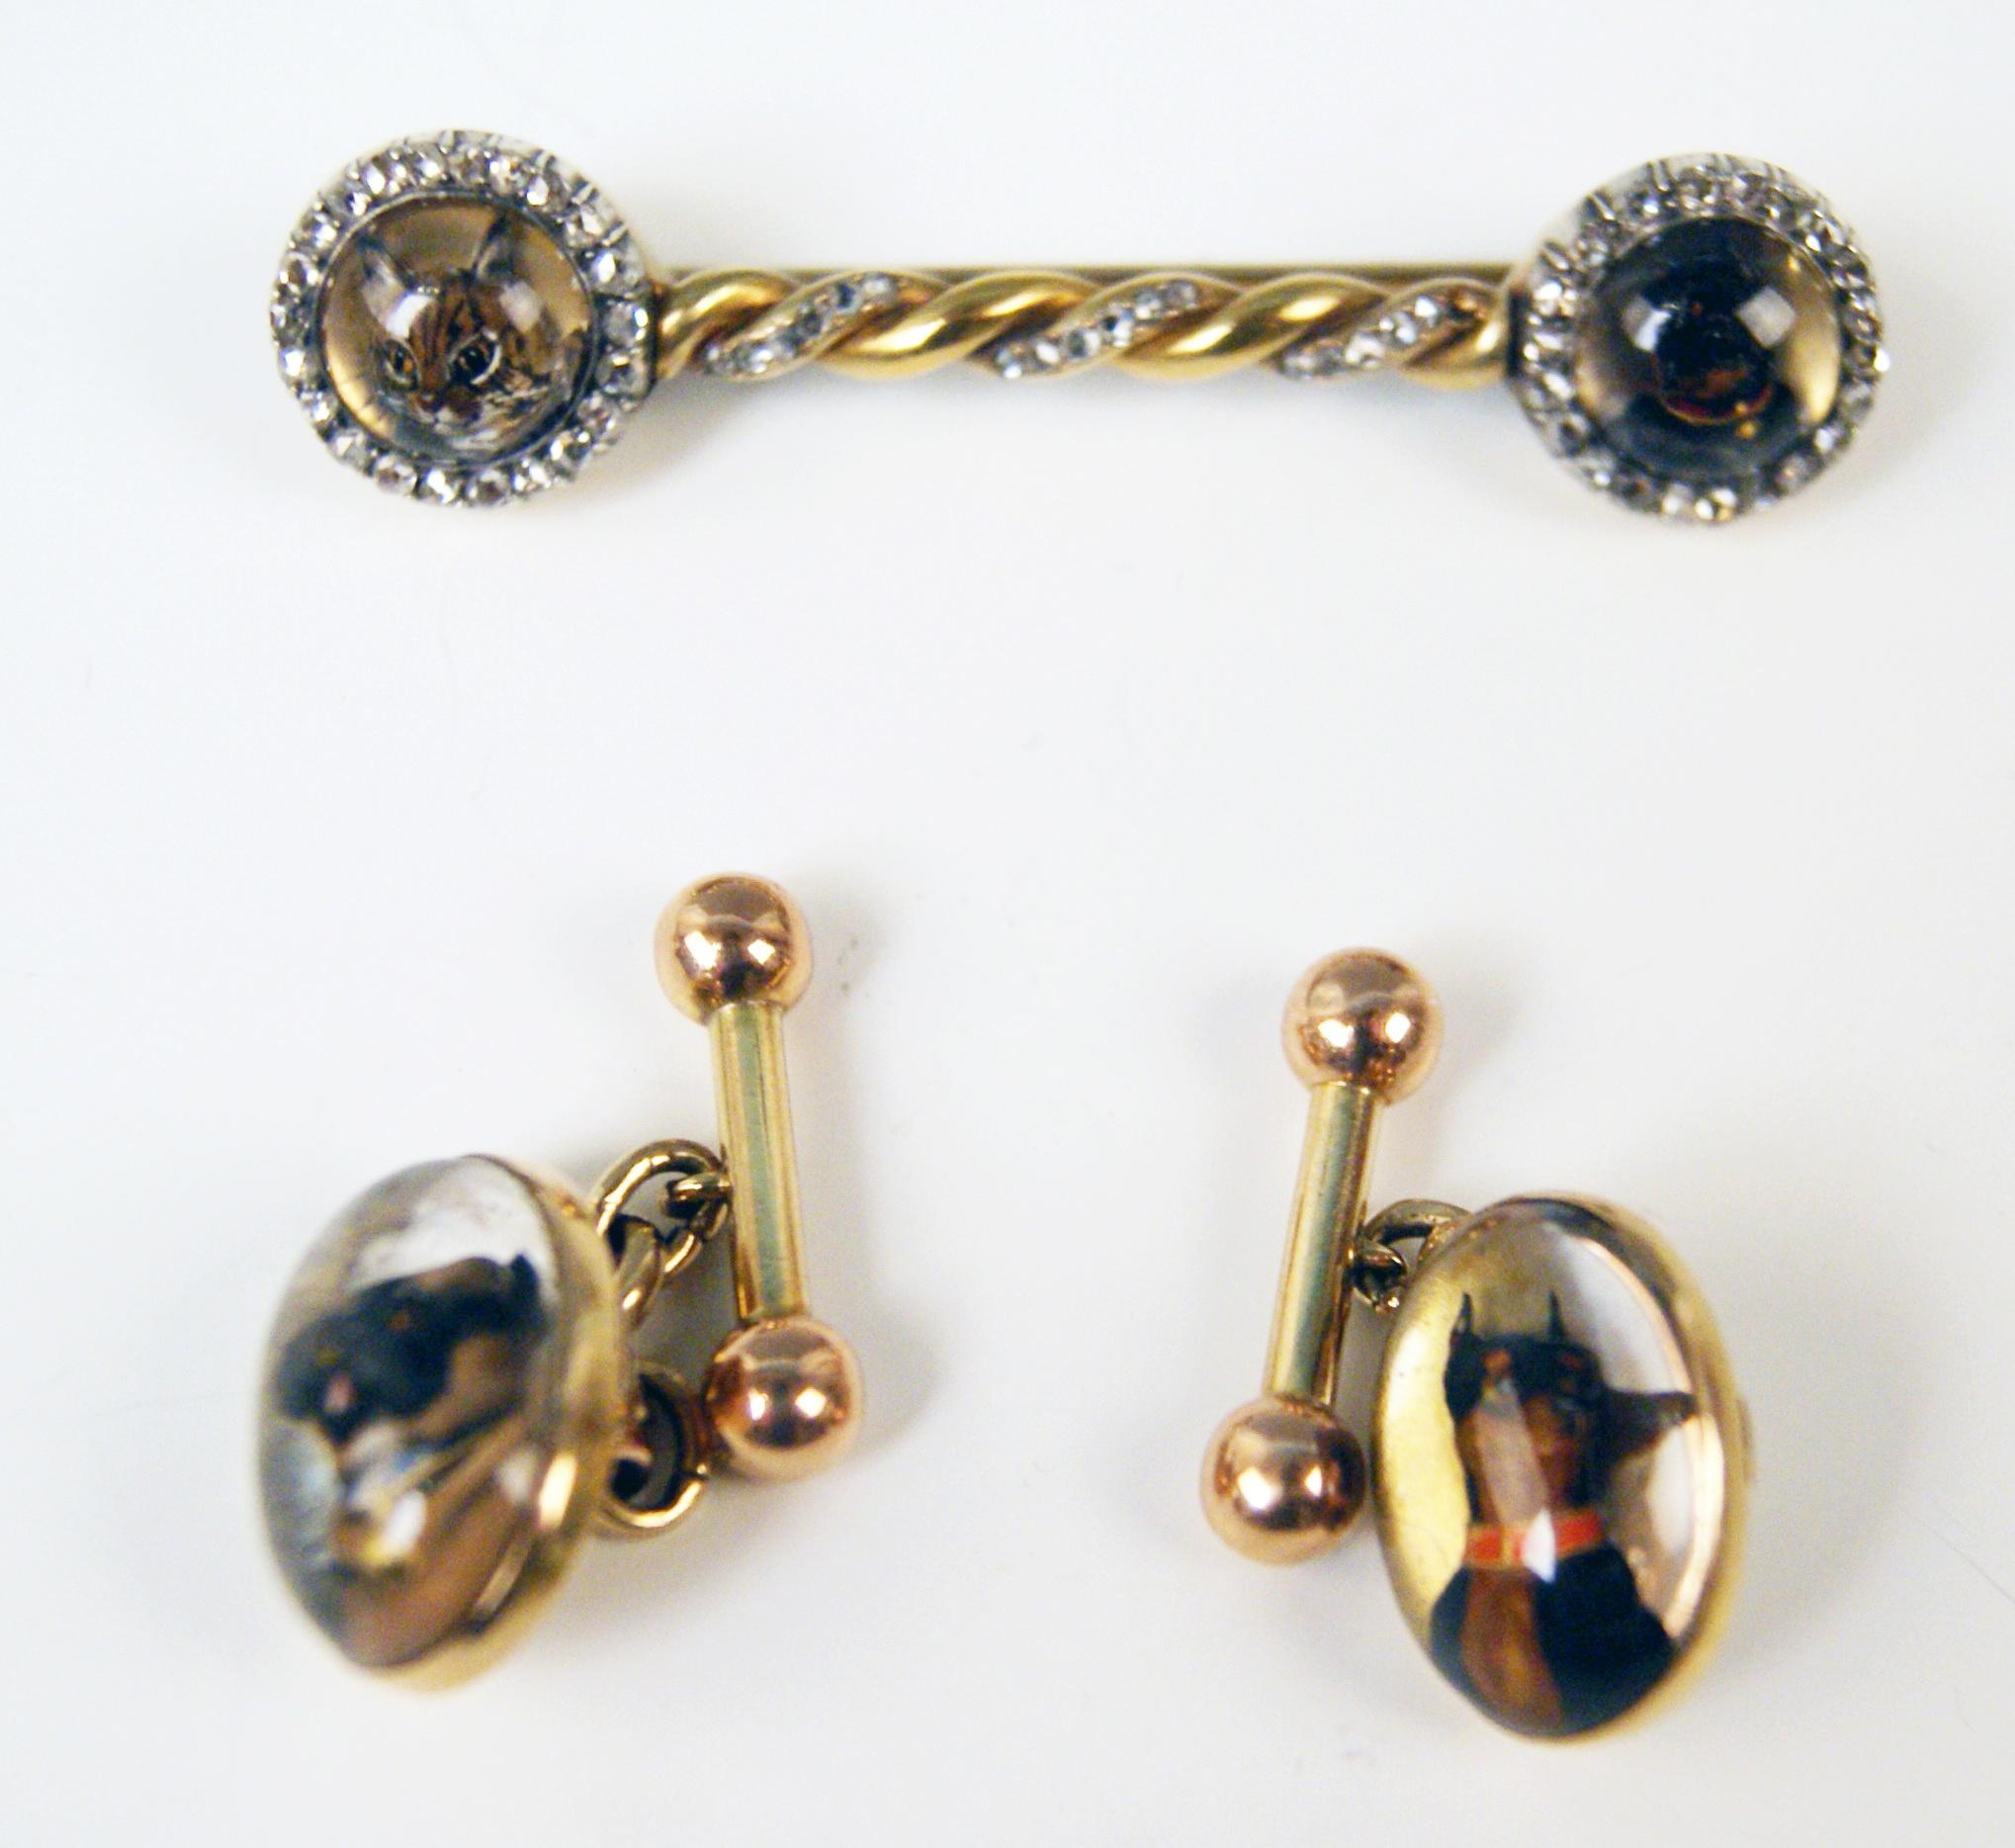 Very interesting set consisting of brooch as well as of cufflinks / studs, made at end of 19th century. 
-- The brooch consists of a wound / spiral rod with a button at each end:
Both buttons are made of cut crystal glass depicting animals' heads -